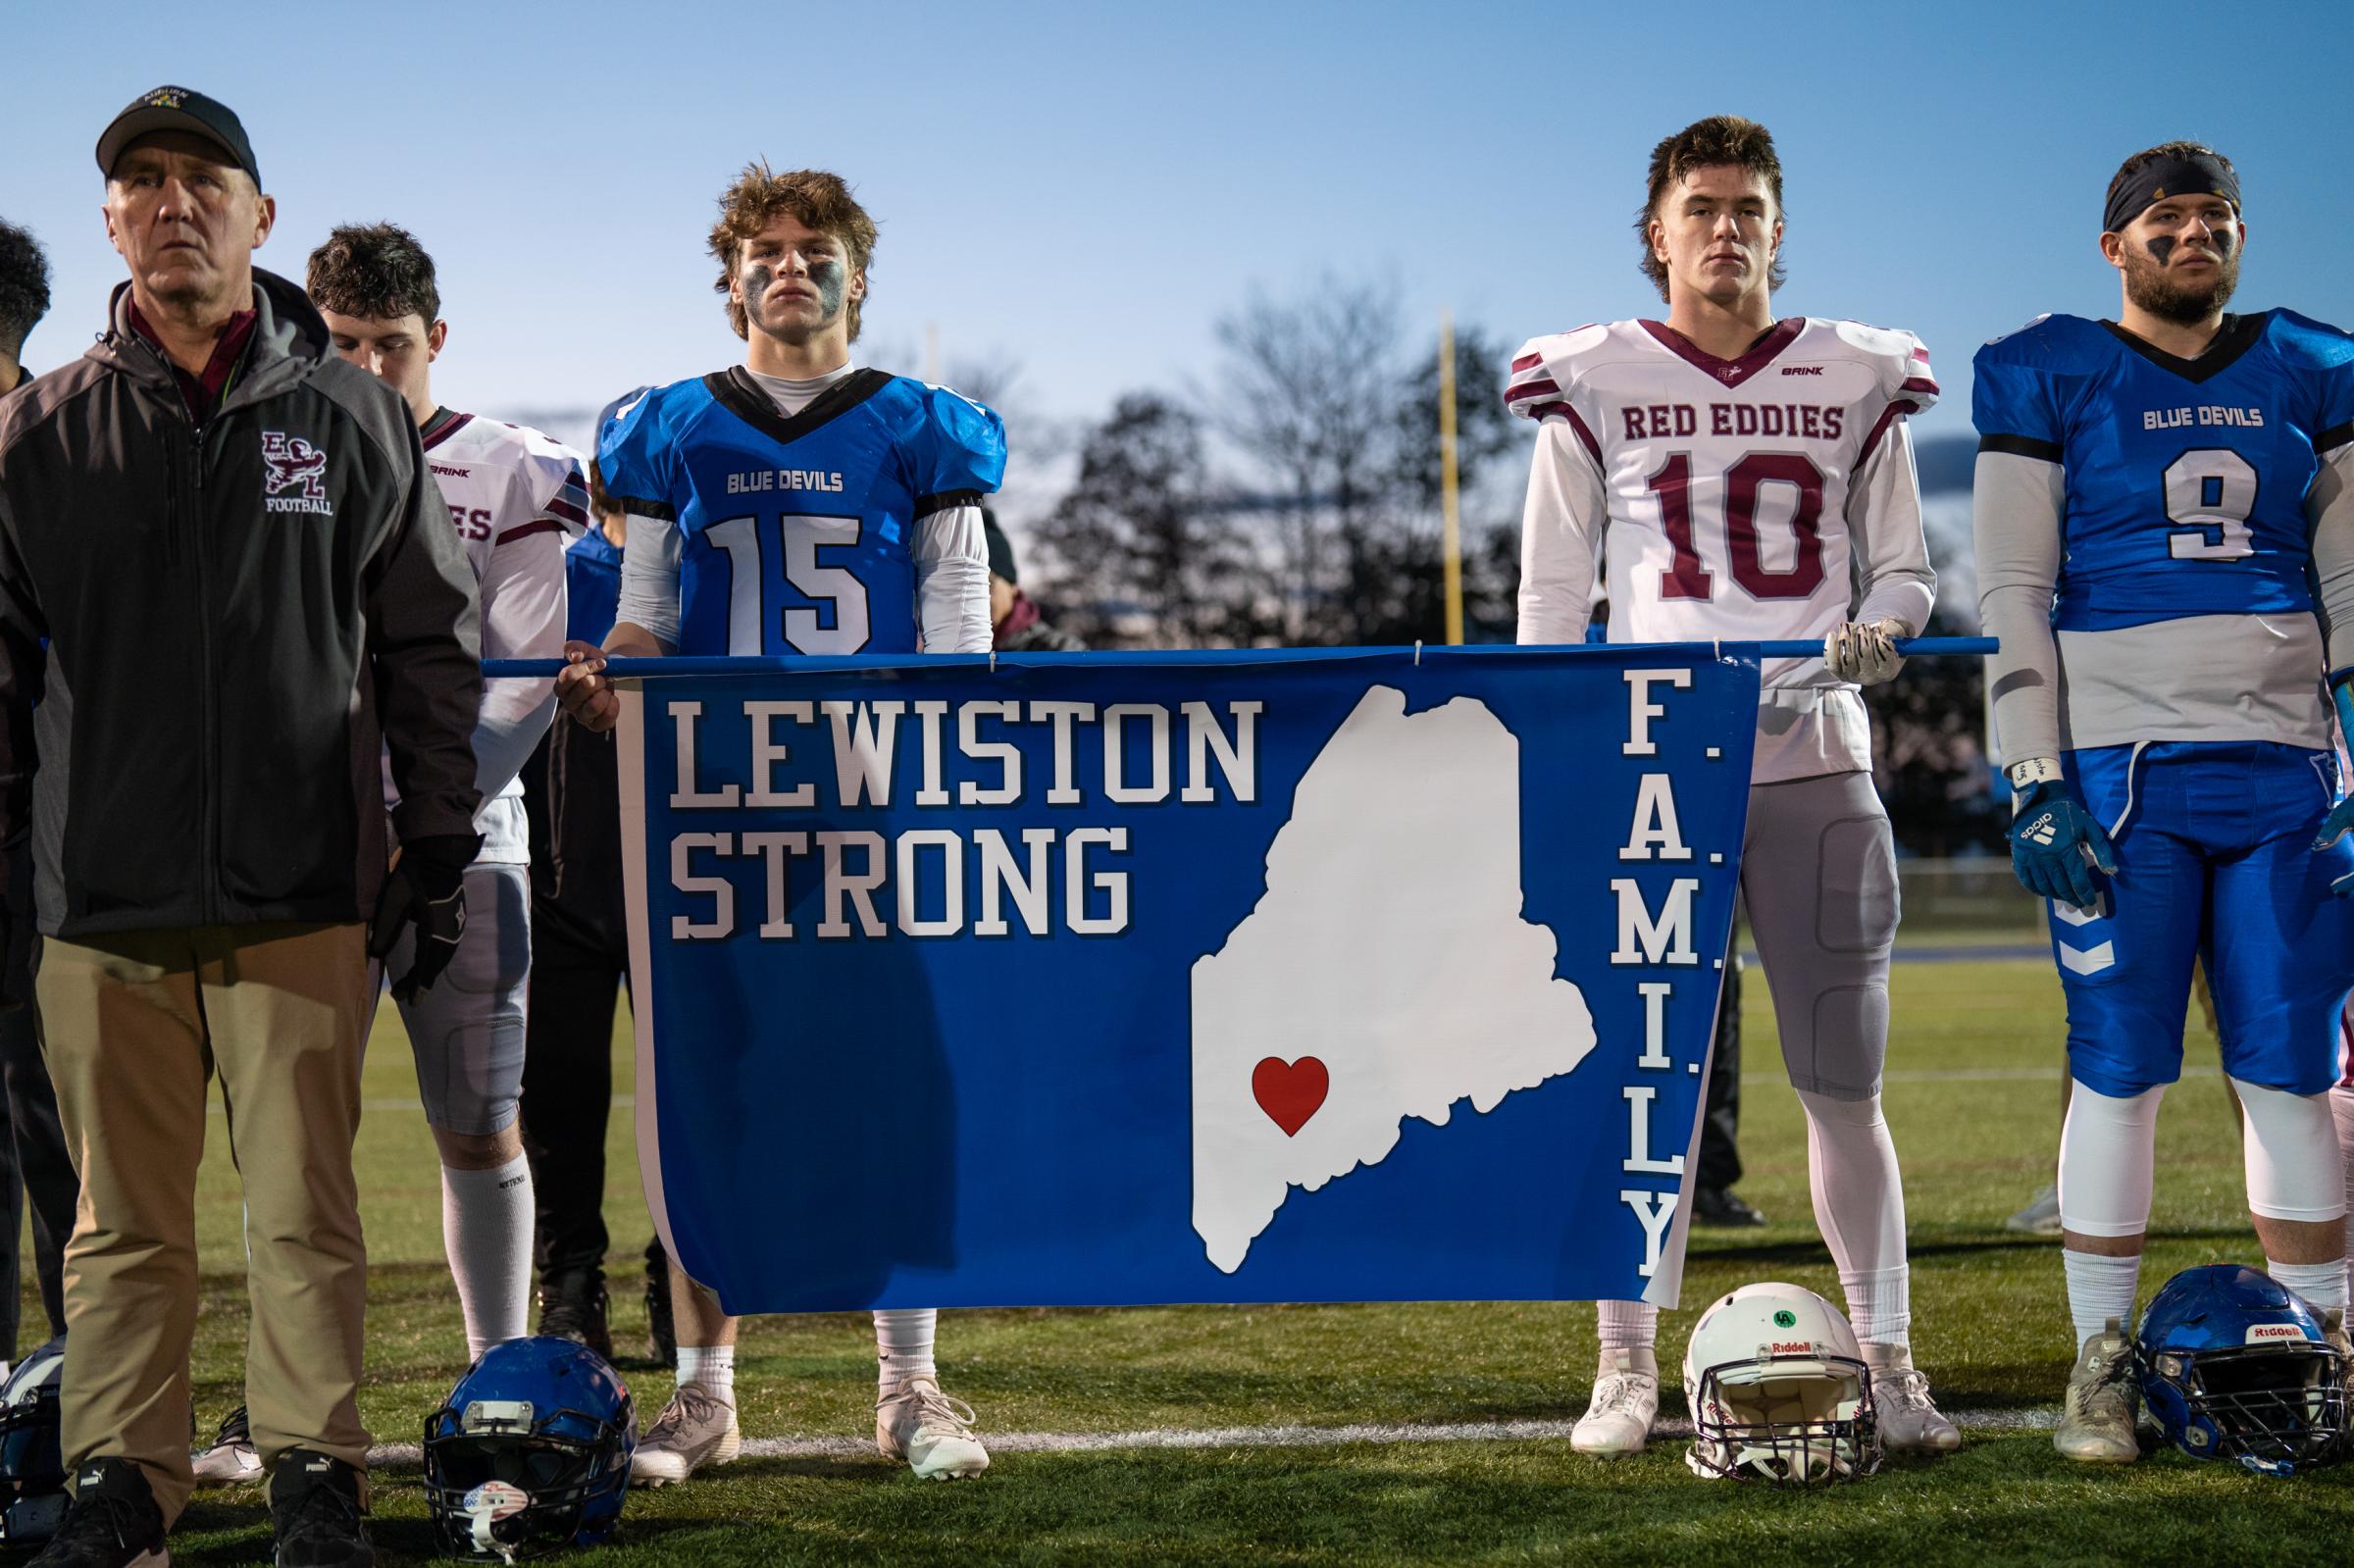 Wash Post - Aftermath of Lewiston Shooting  - Team members of both the Lewiston and Auburn High Schools...